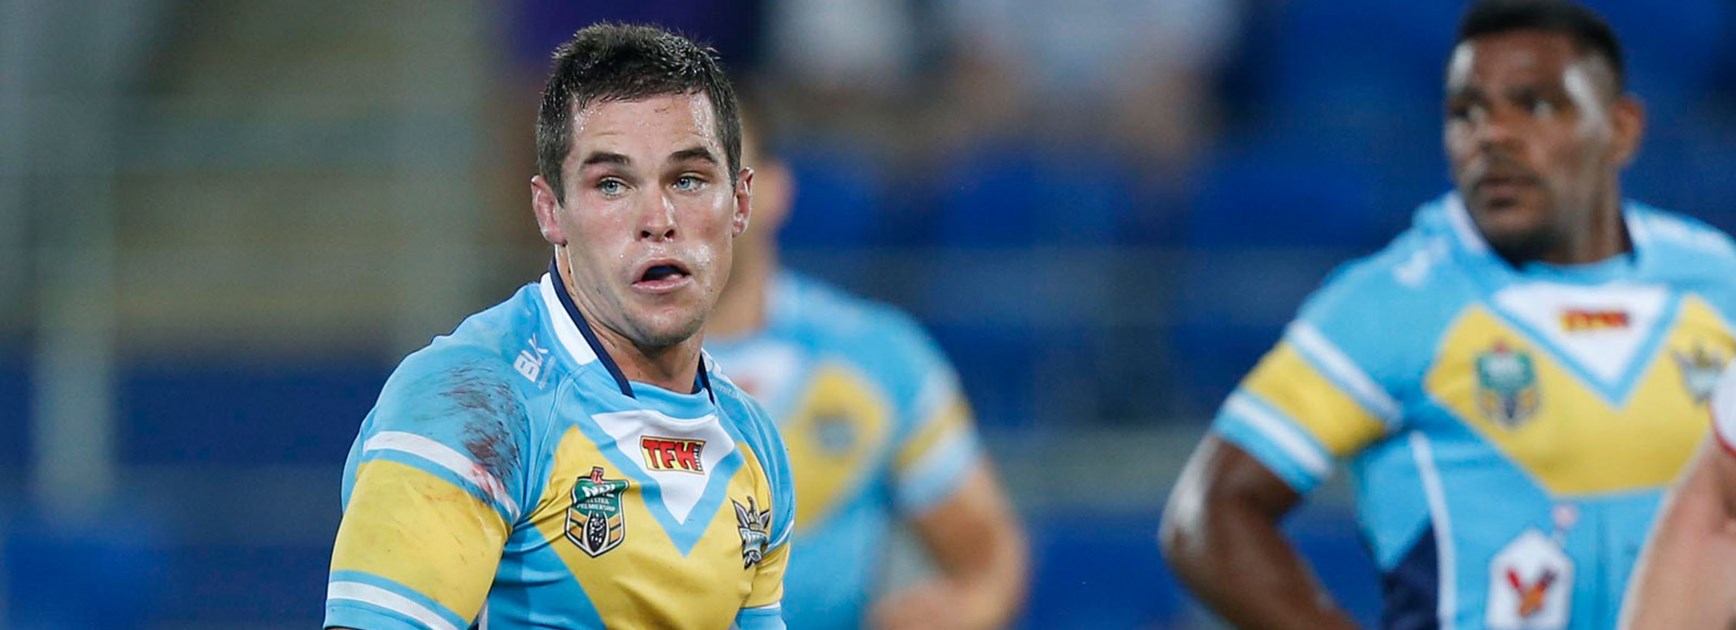 Daniel Mortimer endured a mixed night as the Titans went down to the Knights on Sunday.